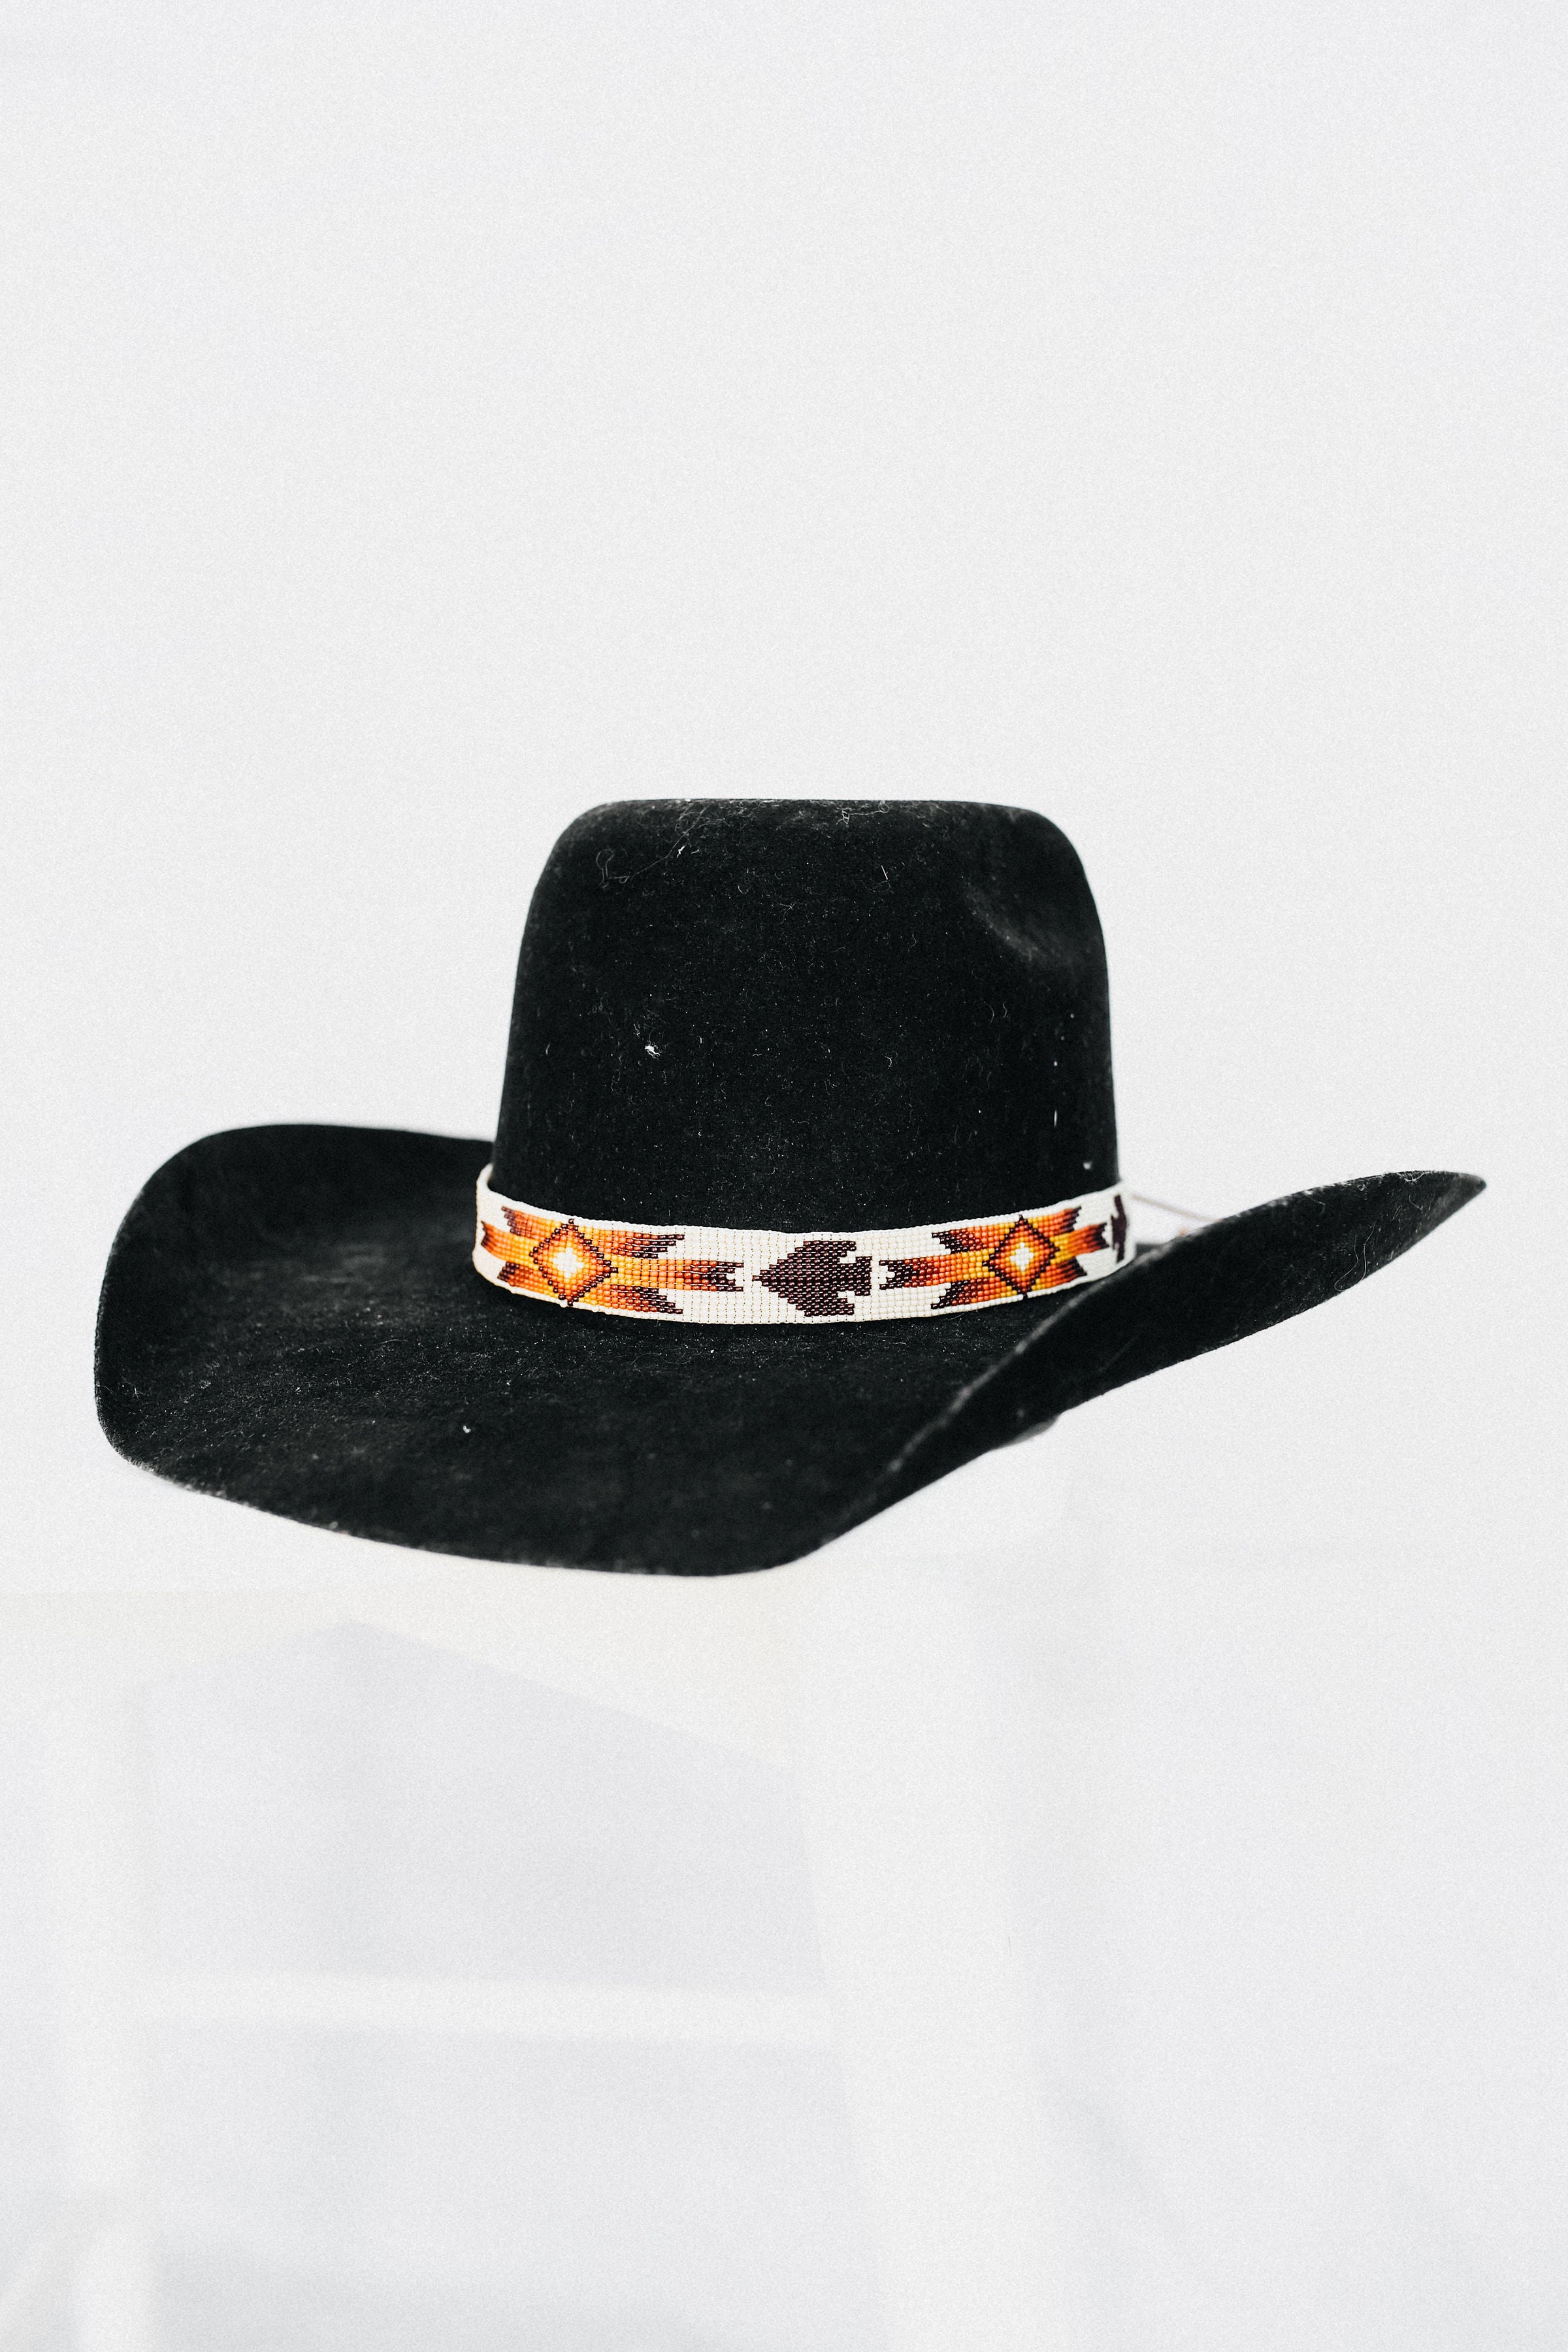 Osage Lid Riggin' Beaded Hat Band - Farm Girl Exclusive